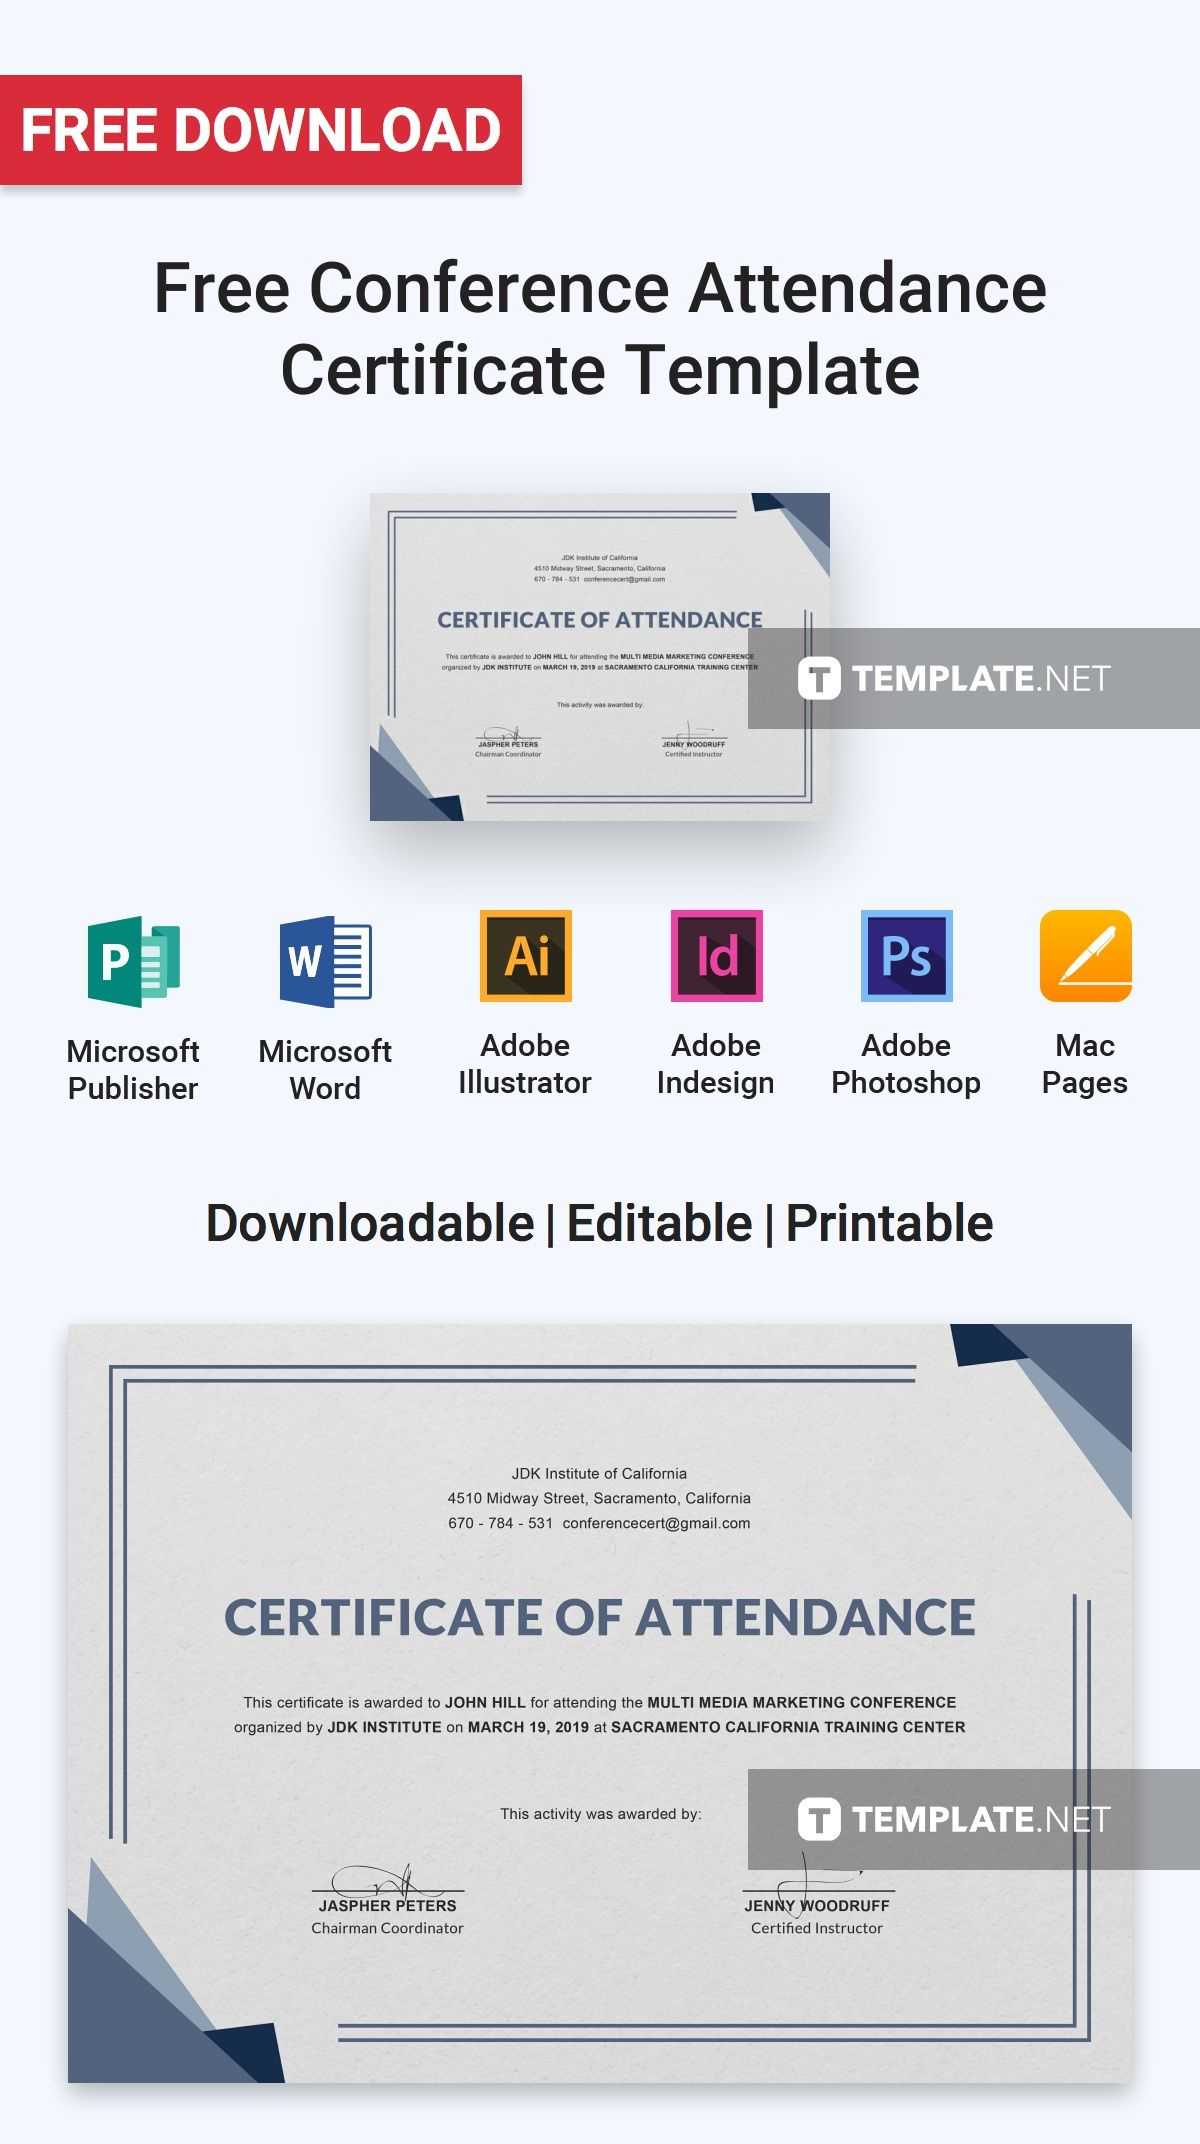 Free Conference Attendance Certificate | Attendance With Regard To Certificate Of Attendance Conference Template